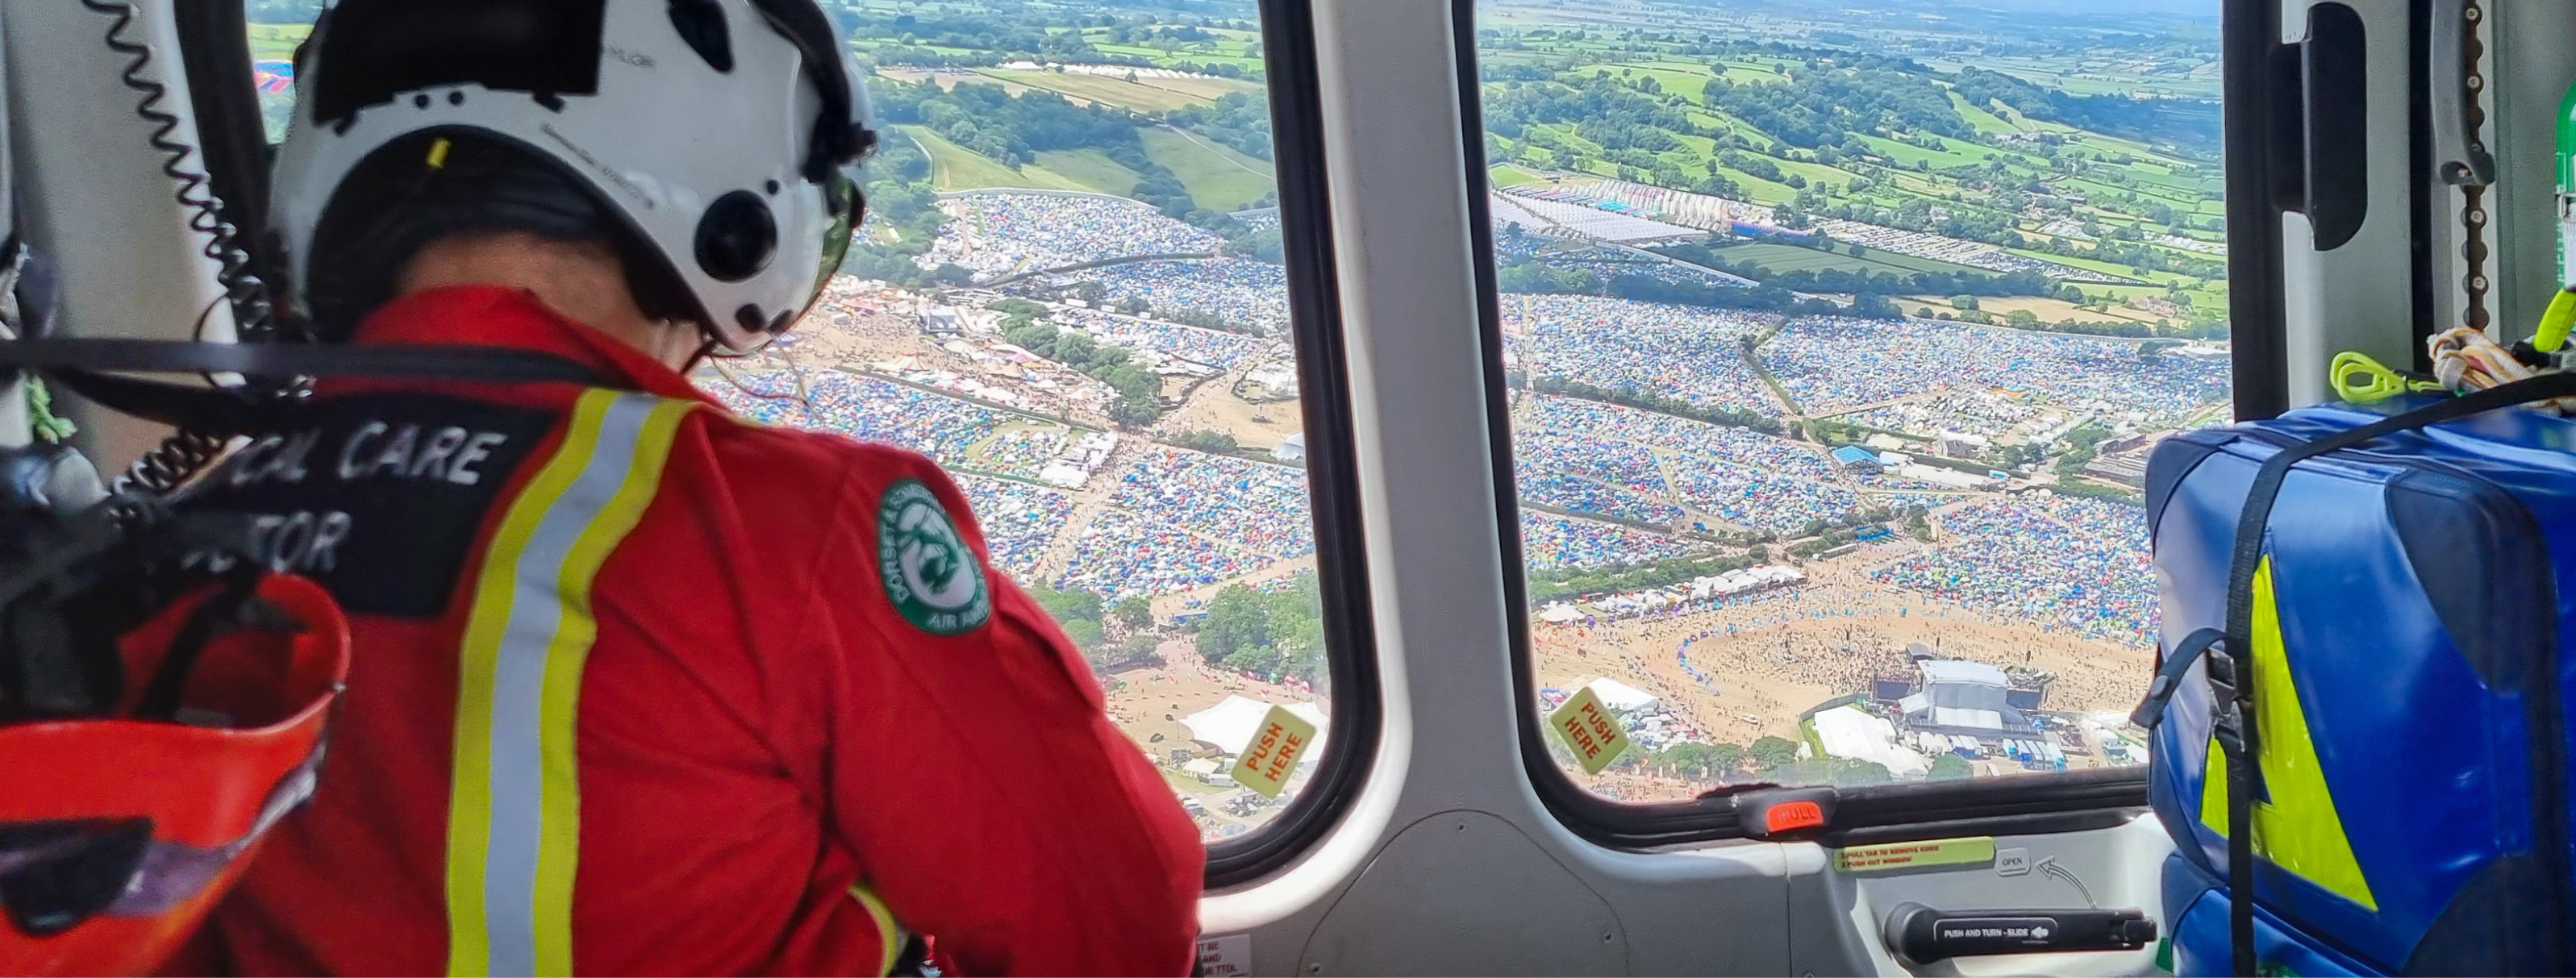 A doctor flying in an air ambulance looking down over a city